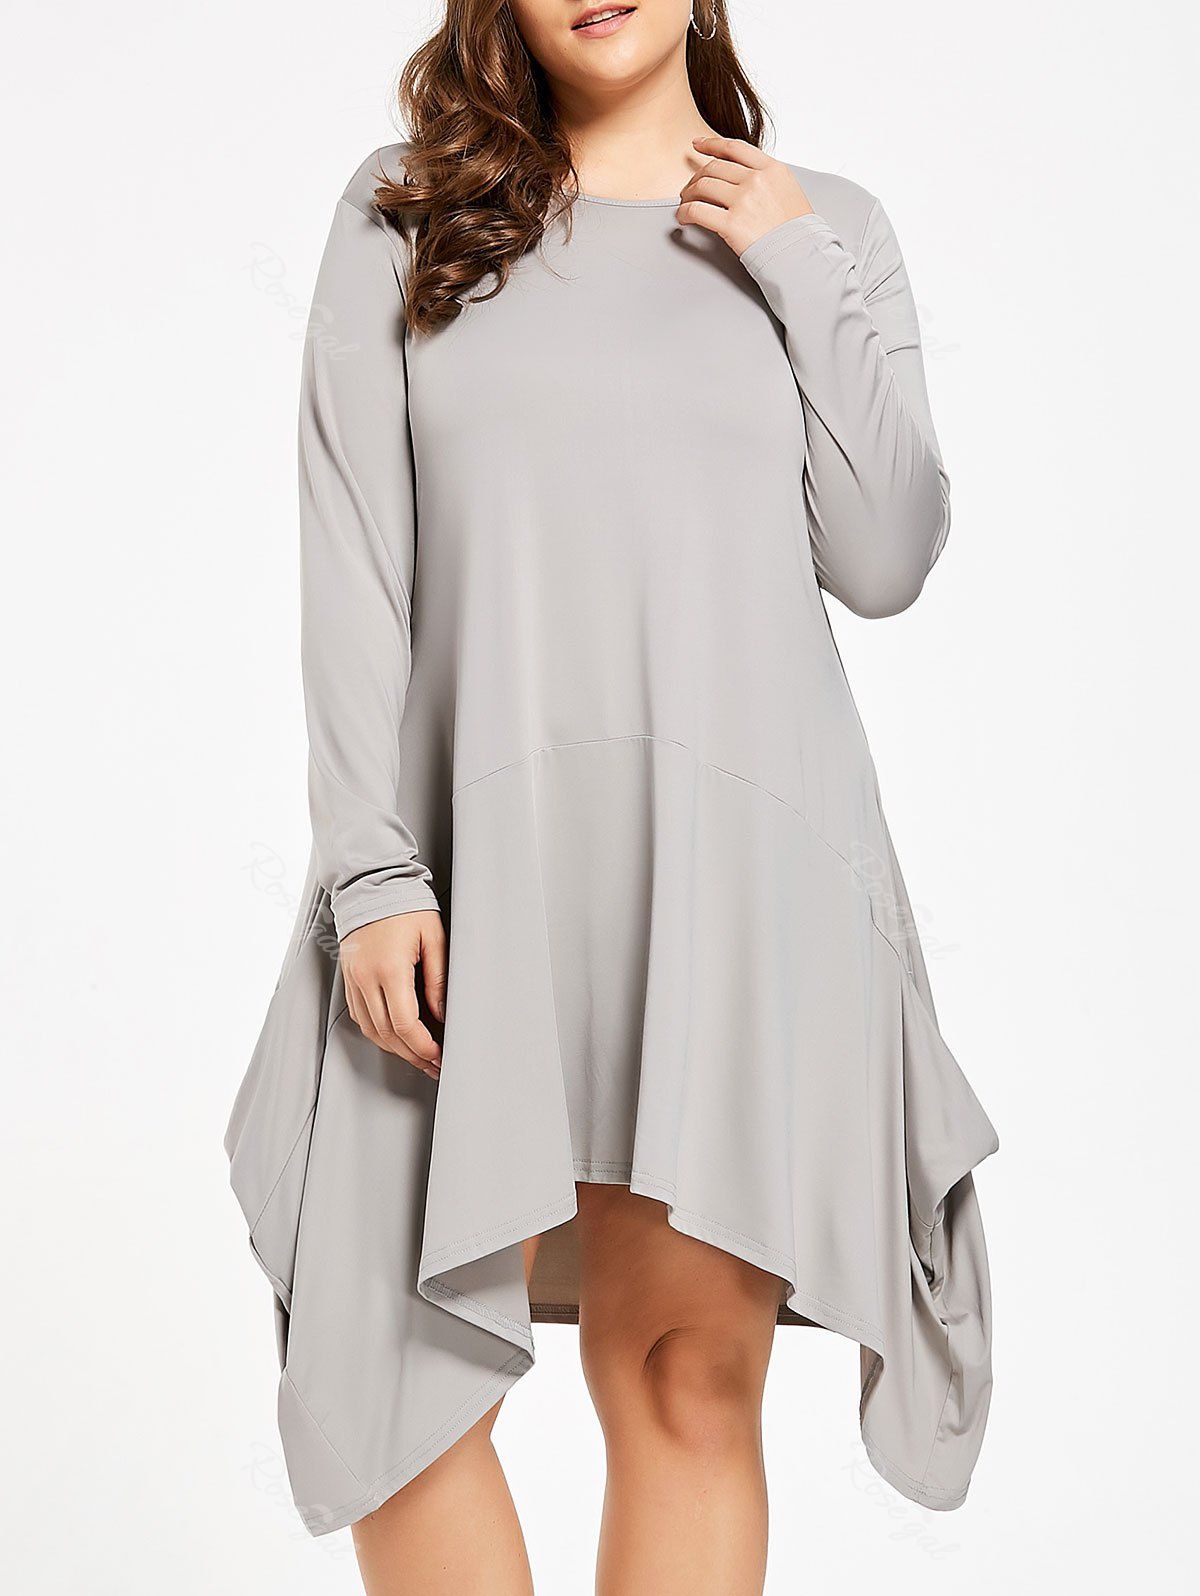 [33% OFF] Plus Size Asymmetric Swing T-shirt Dress With Pocket | Rosegal